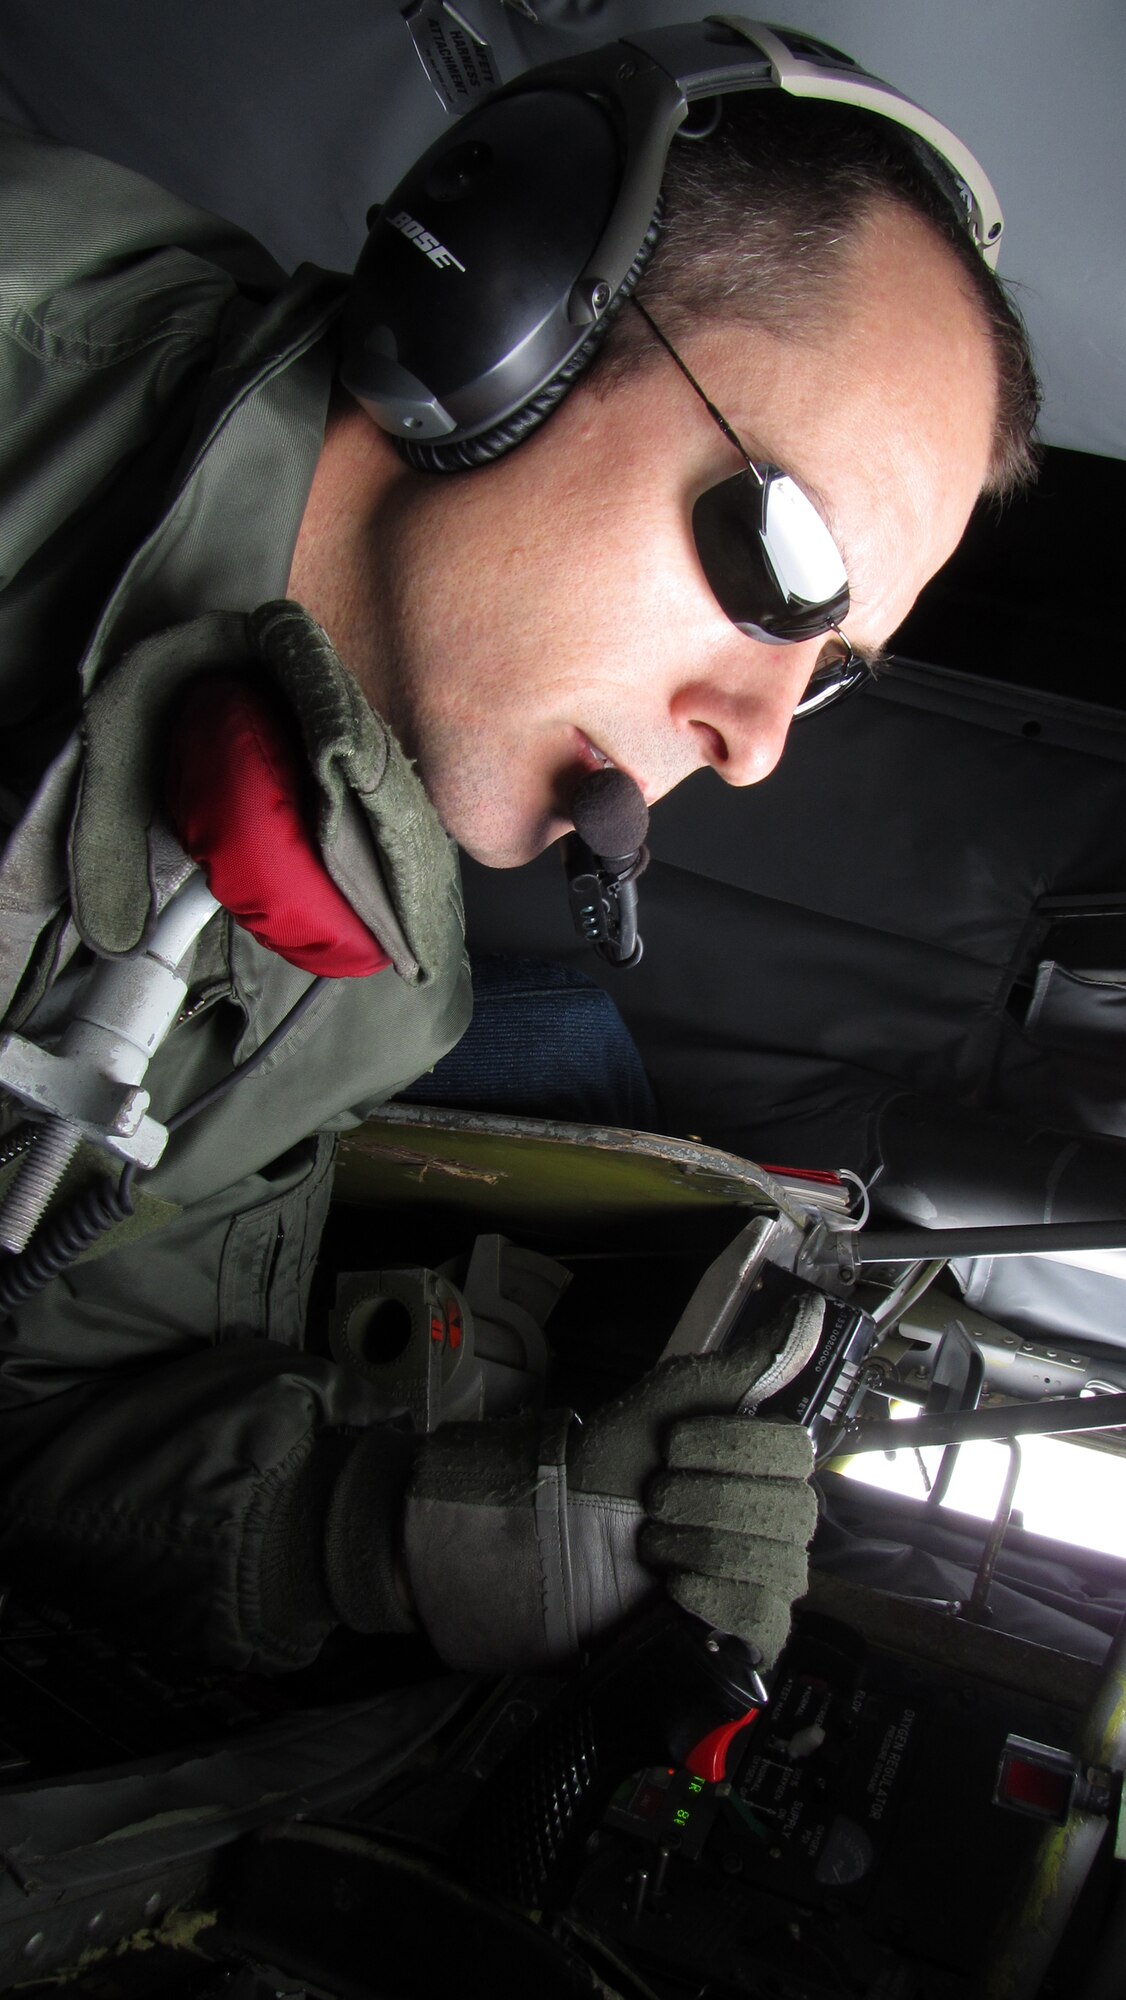 RAF MILDENHALL, England -- Tech. Sgt. Randy Stinnett, 100th Air Refueling Wing, checks out the controls of his KC-135 refueling boom before the arrival of recipient aircraft Aug. 5.  The mission was in support of Allied Strike, a multinational exercise which ran from Aug. 2 to 5, and involved American, Belgian and German aircraft.  (U.S. Air Force photo/Staff Sgt. Austin M. May)